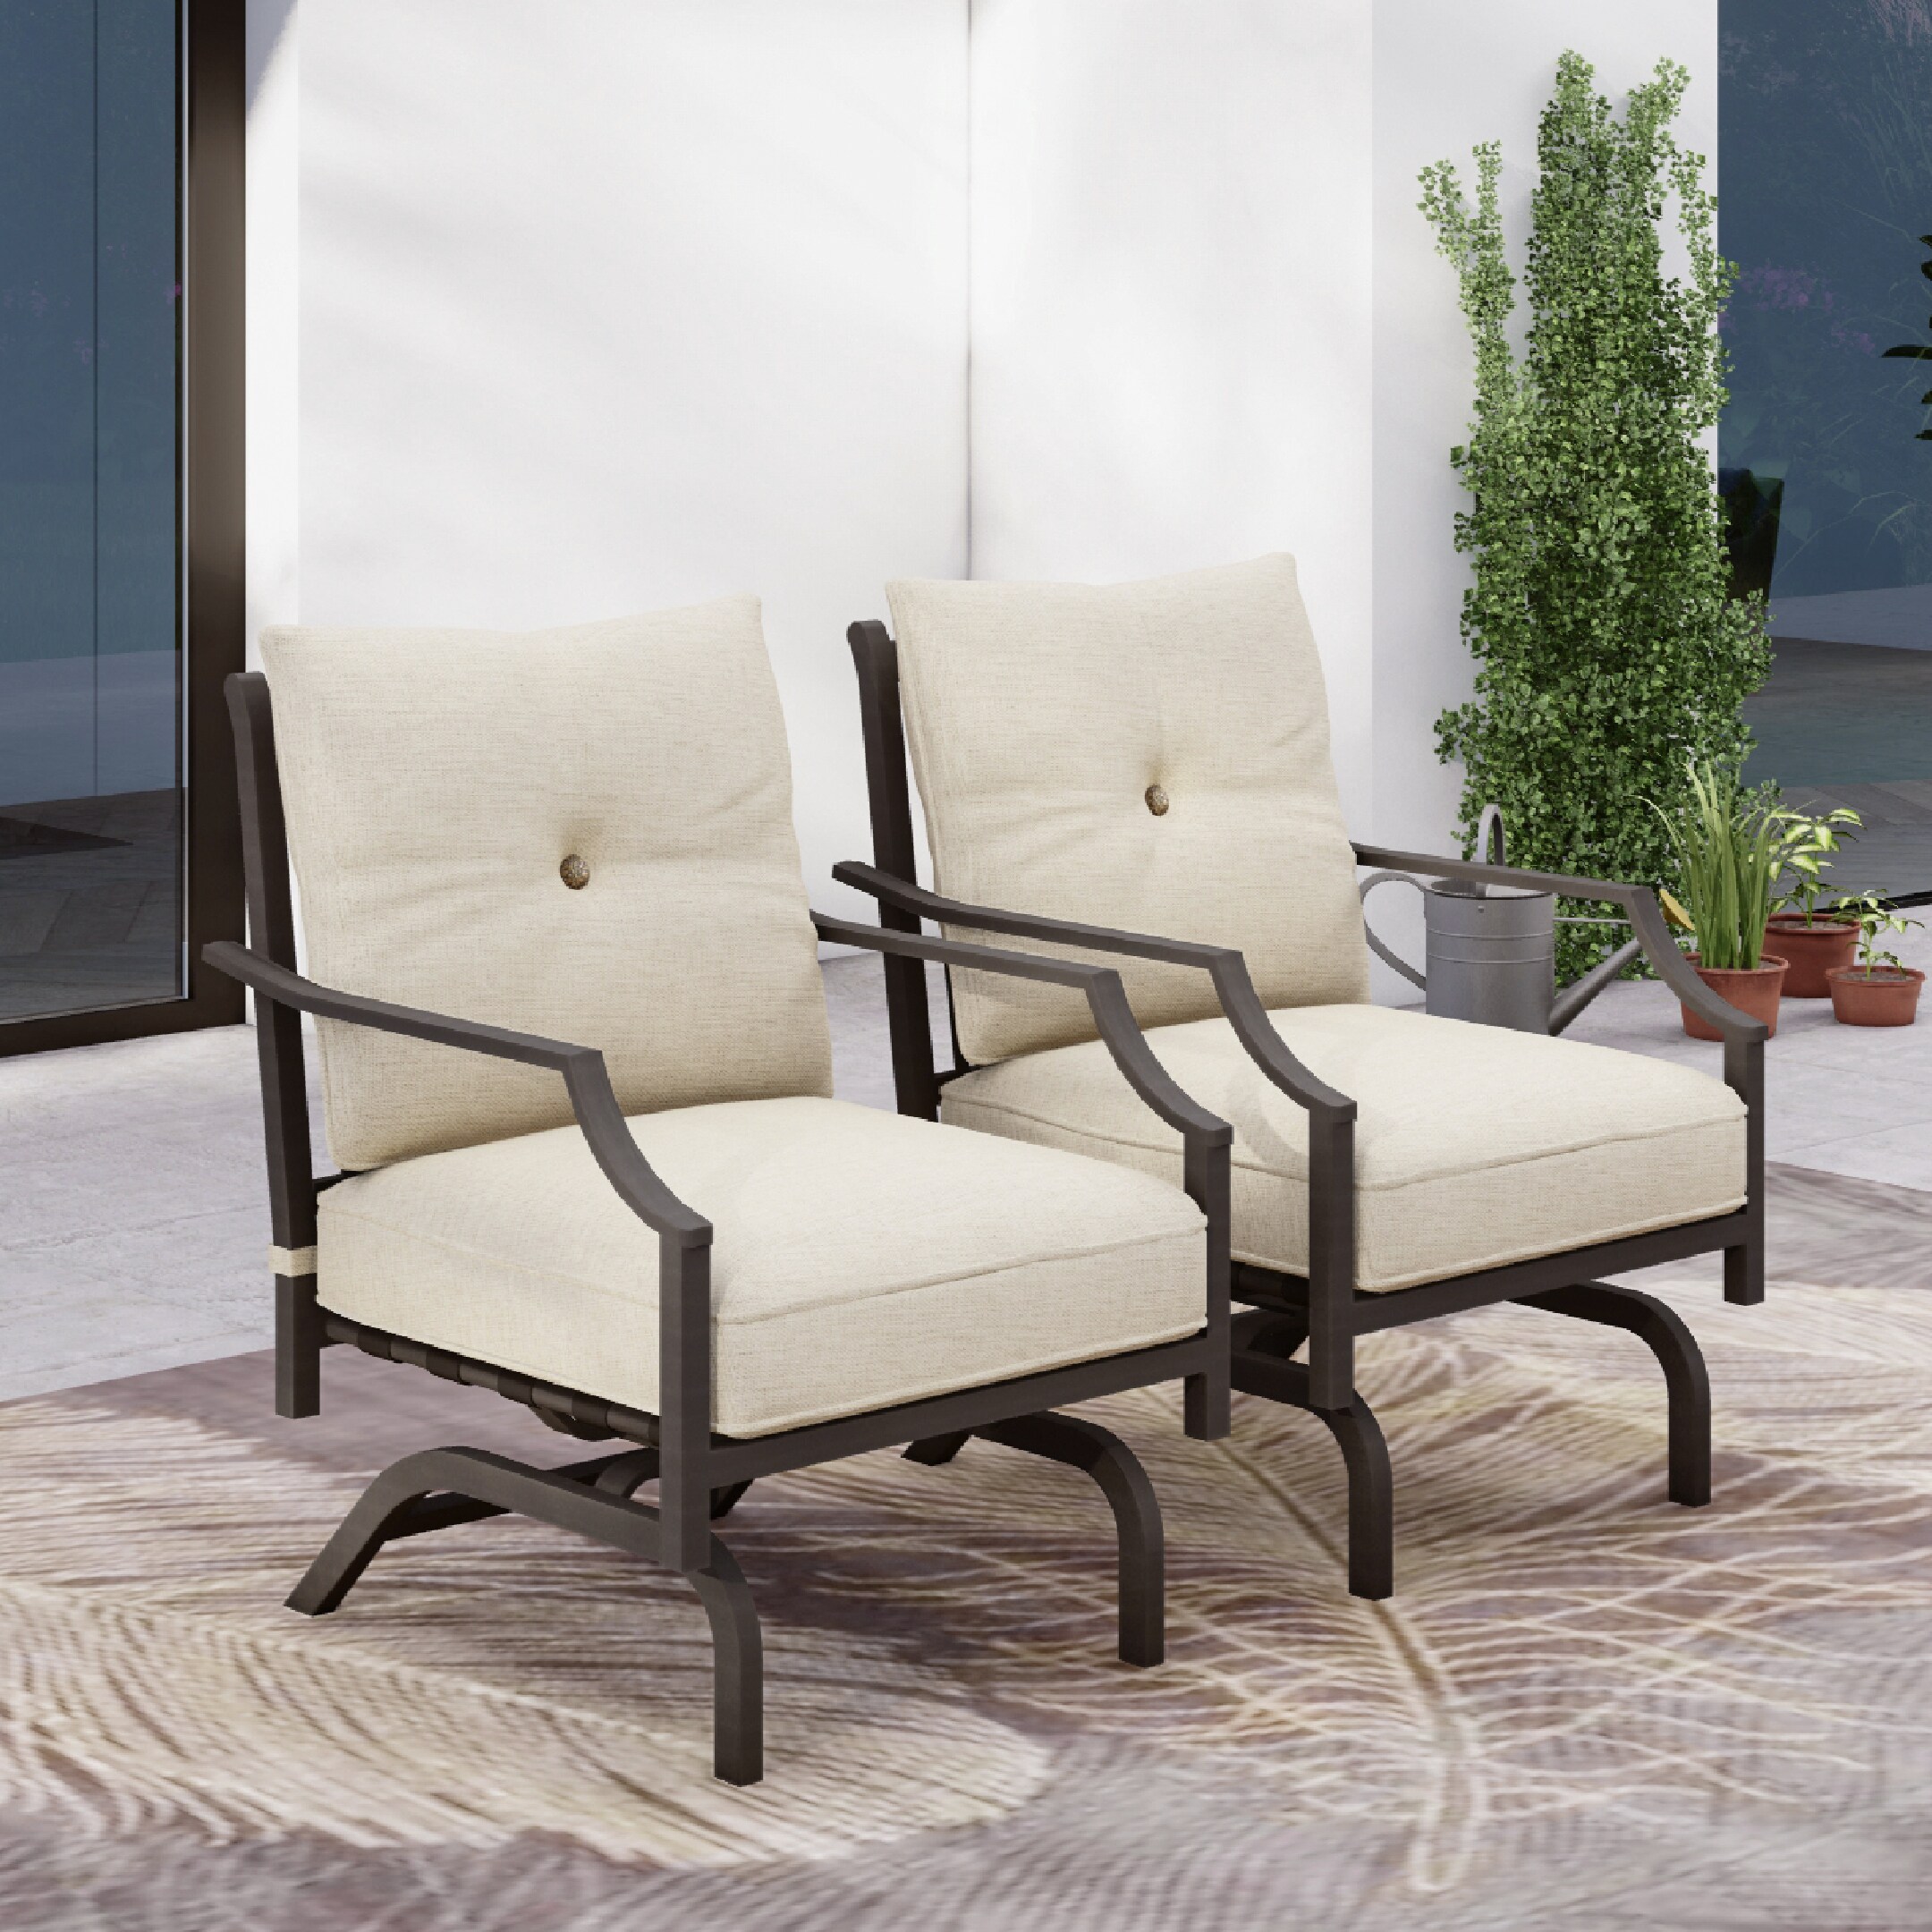 Top Home Space 2 Black Steel Frame Rocking Chair(s) with Off-white ...